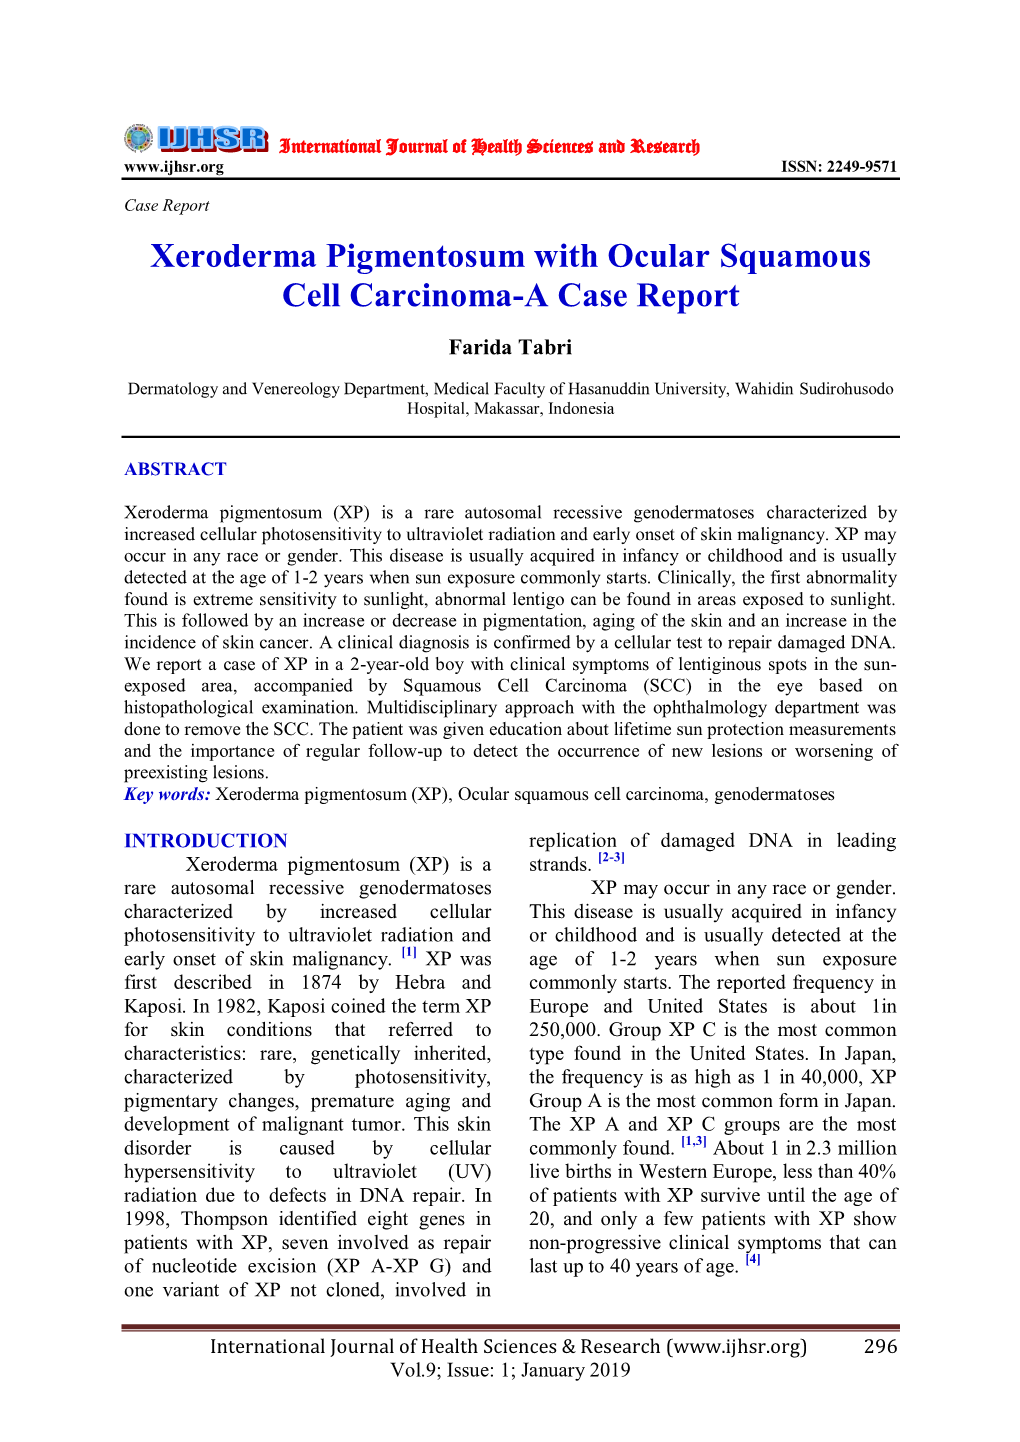 Xeroderma Pigmentosum with Ocular Squamous Cell Carcinoma-A Case Report